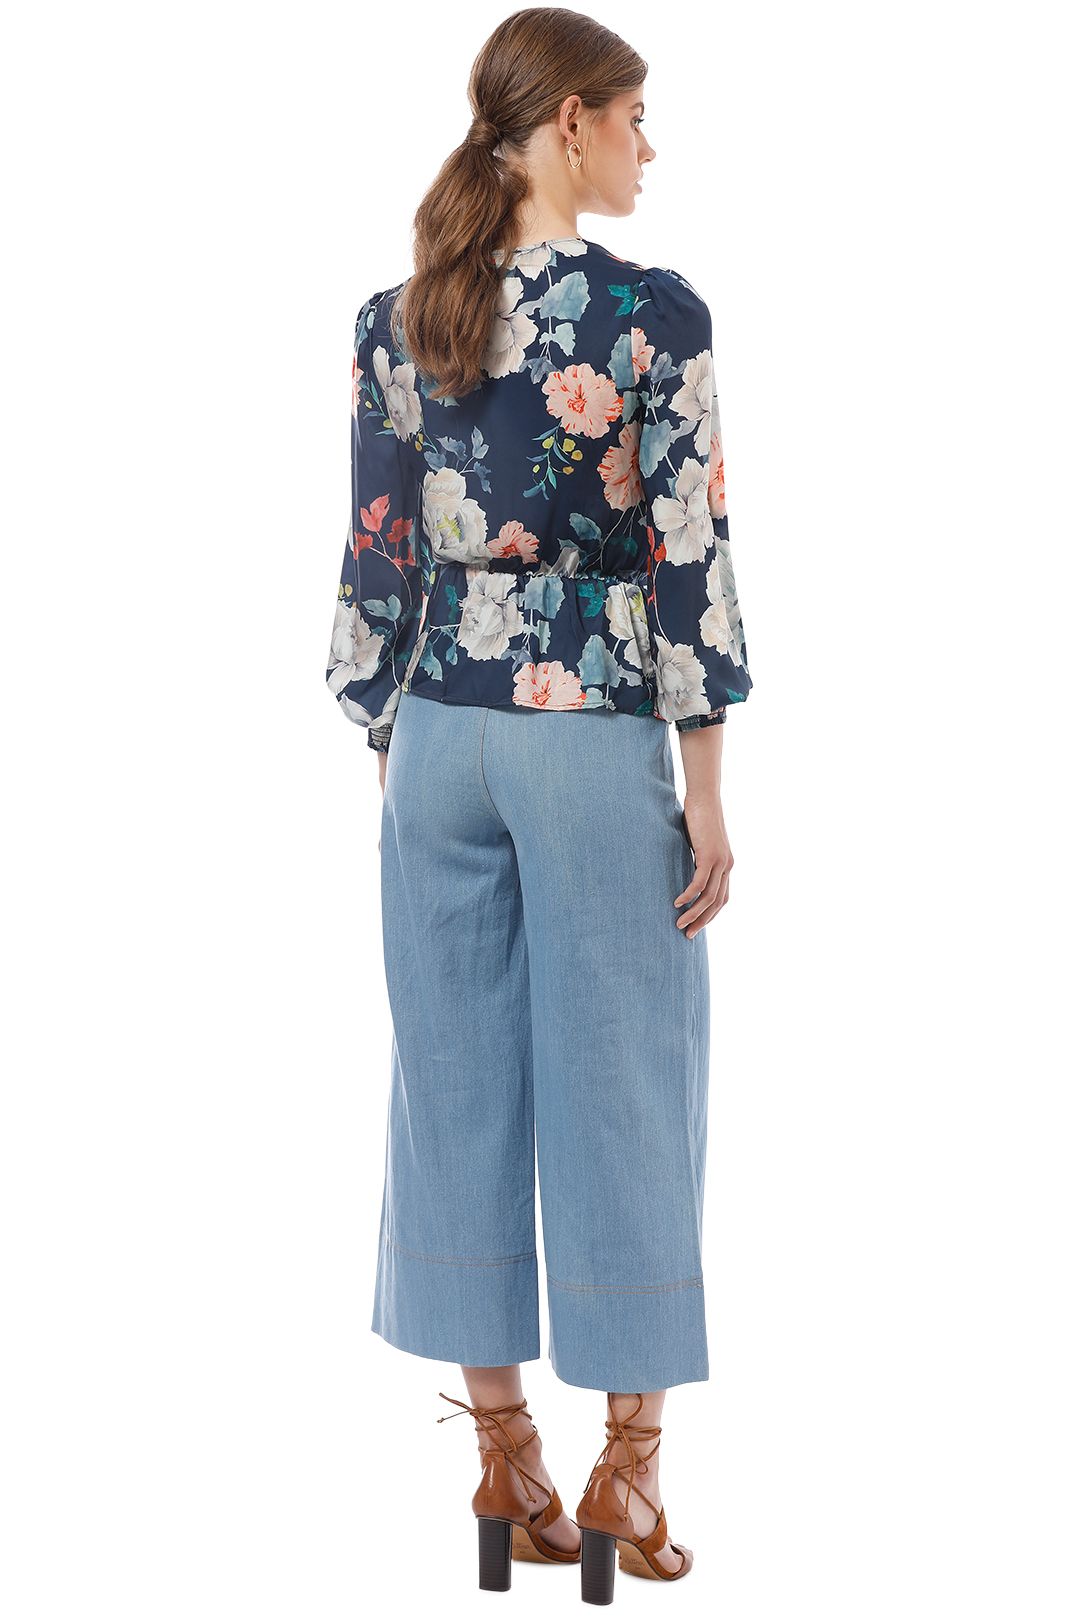 Sheike - Rosie Blouse - Navy Floral - Back